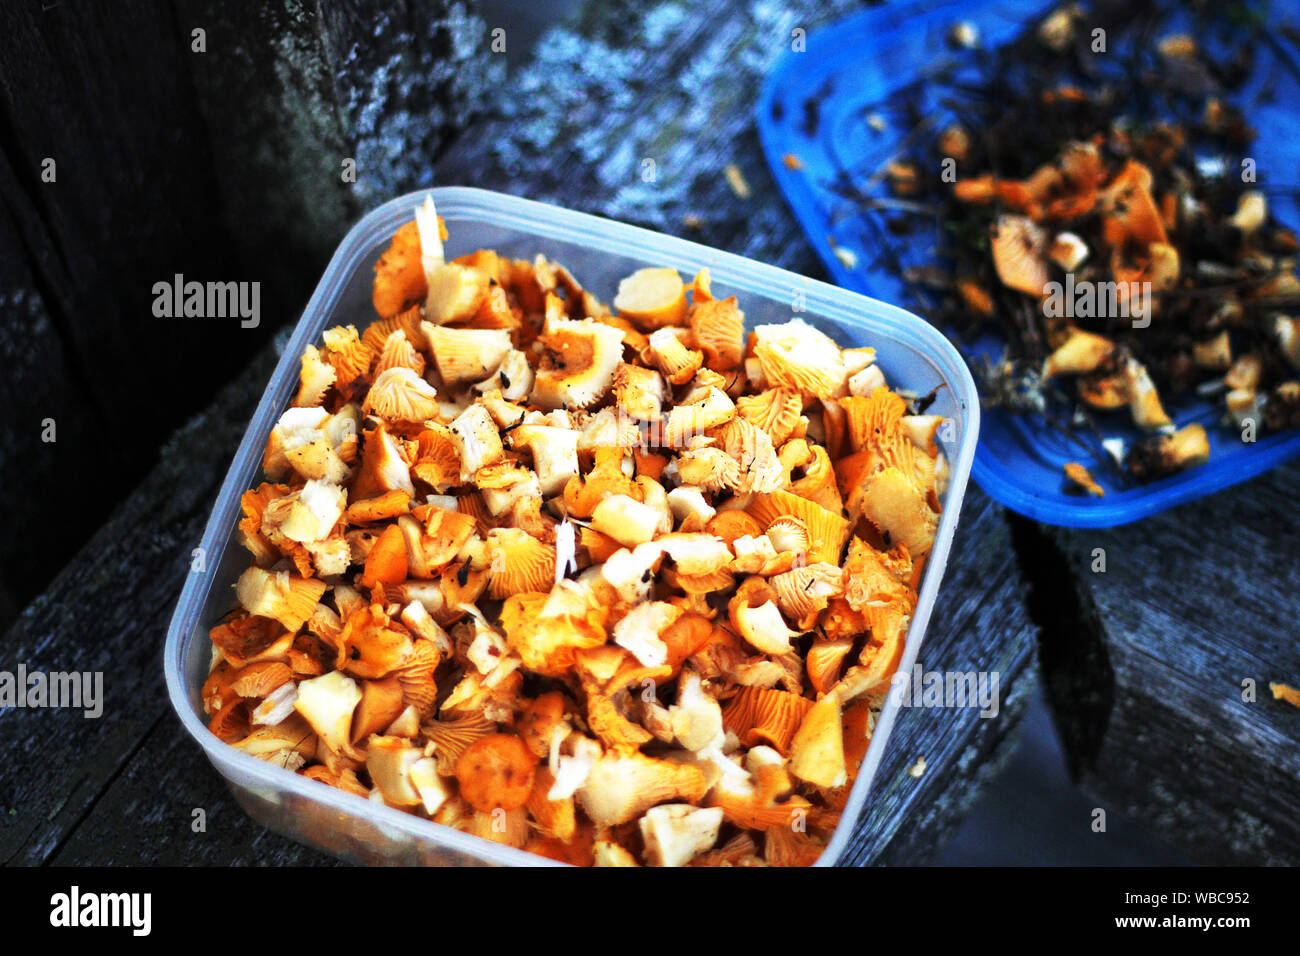 Self picked and chopped chanterelle, cantharellus cibarius mushroom in a plastic container Stock Photo